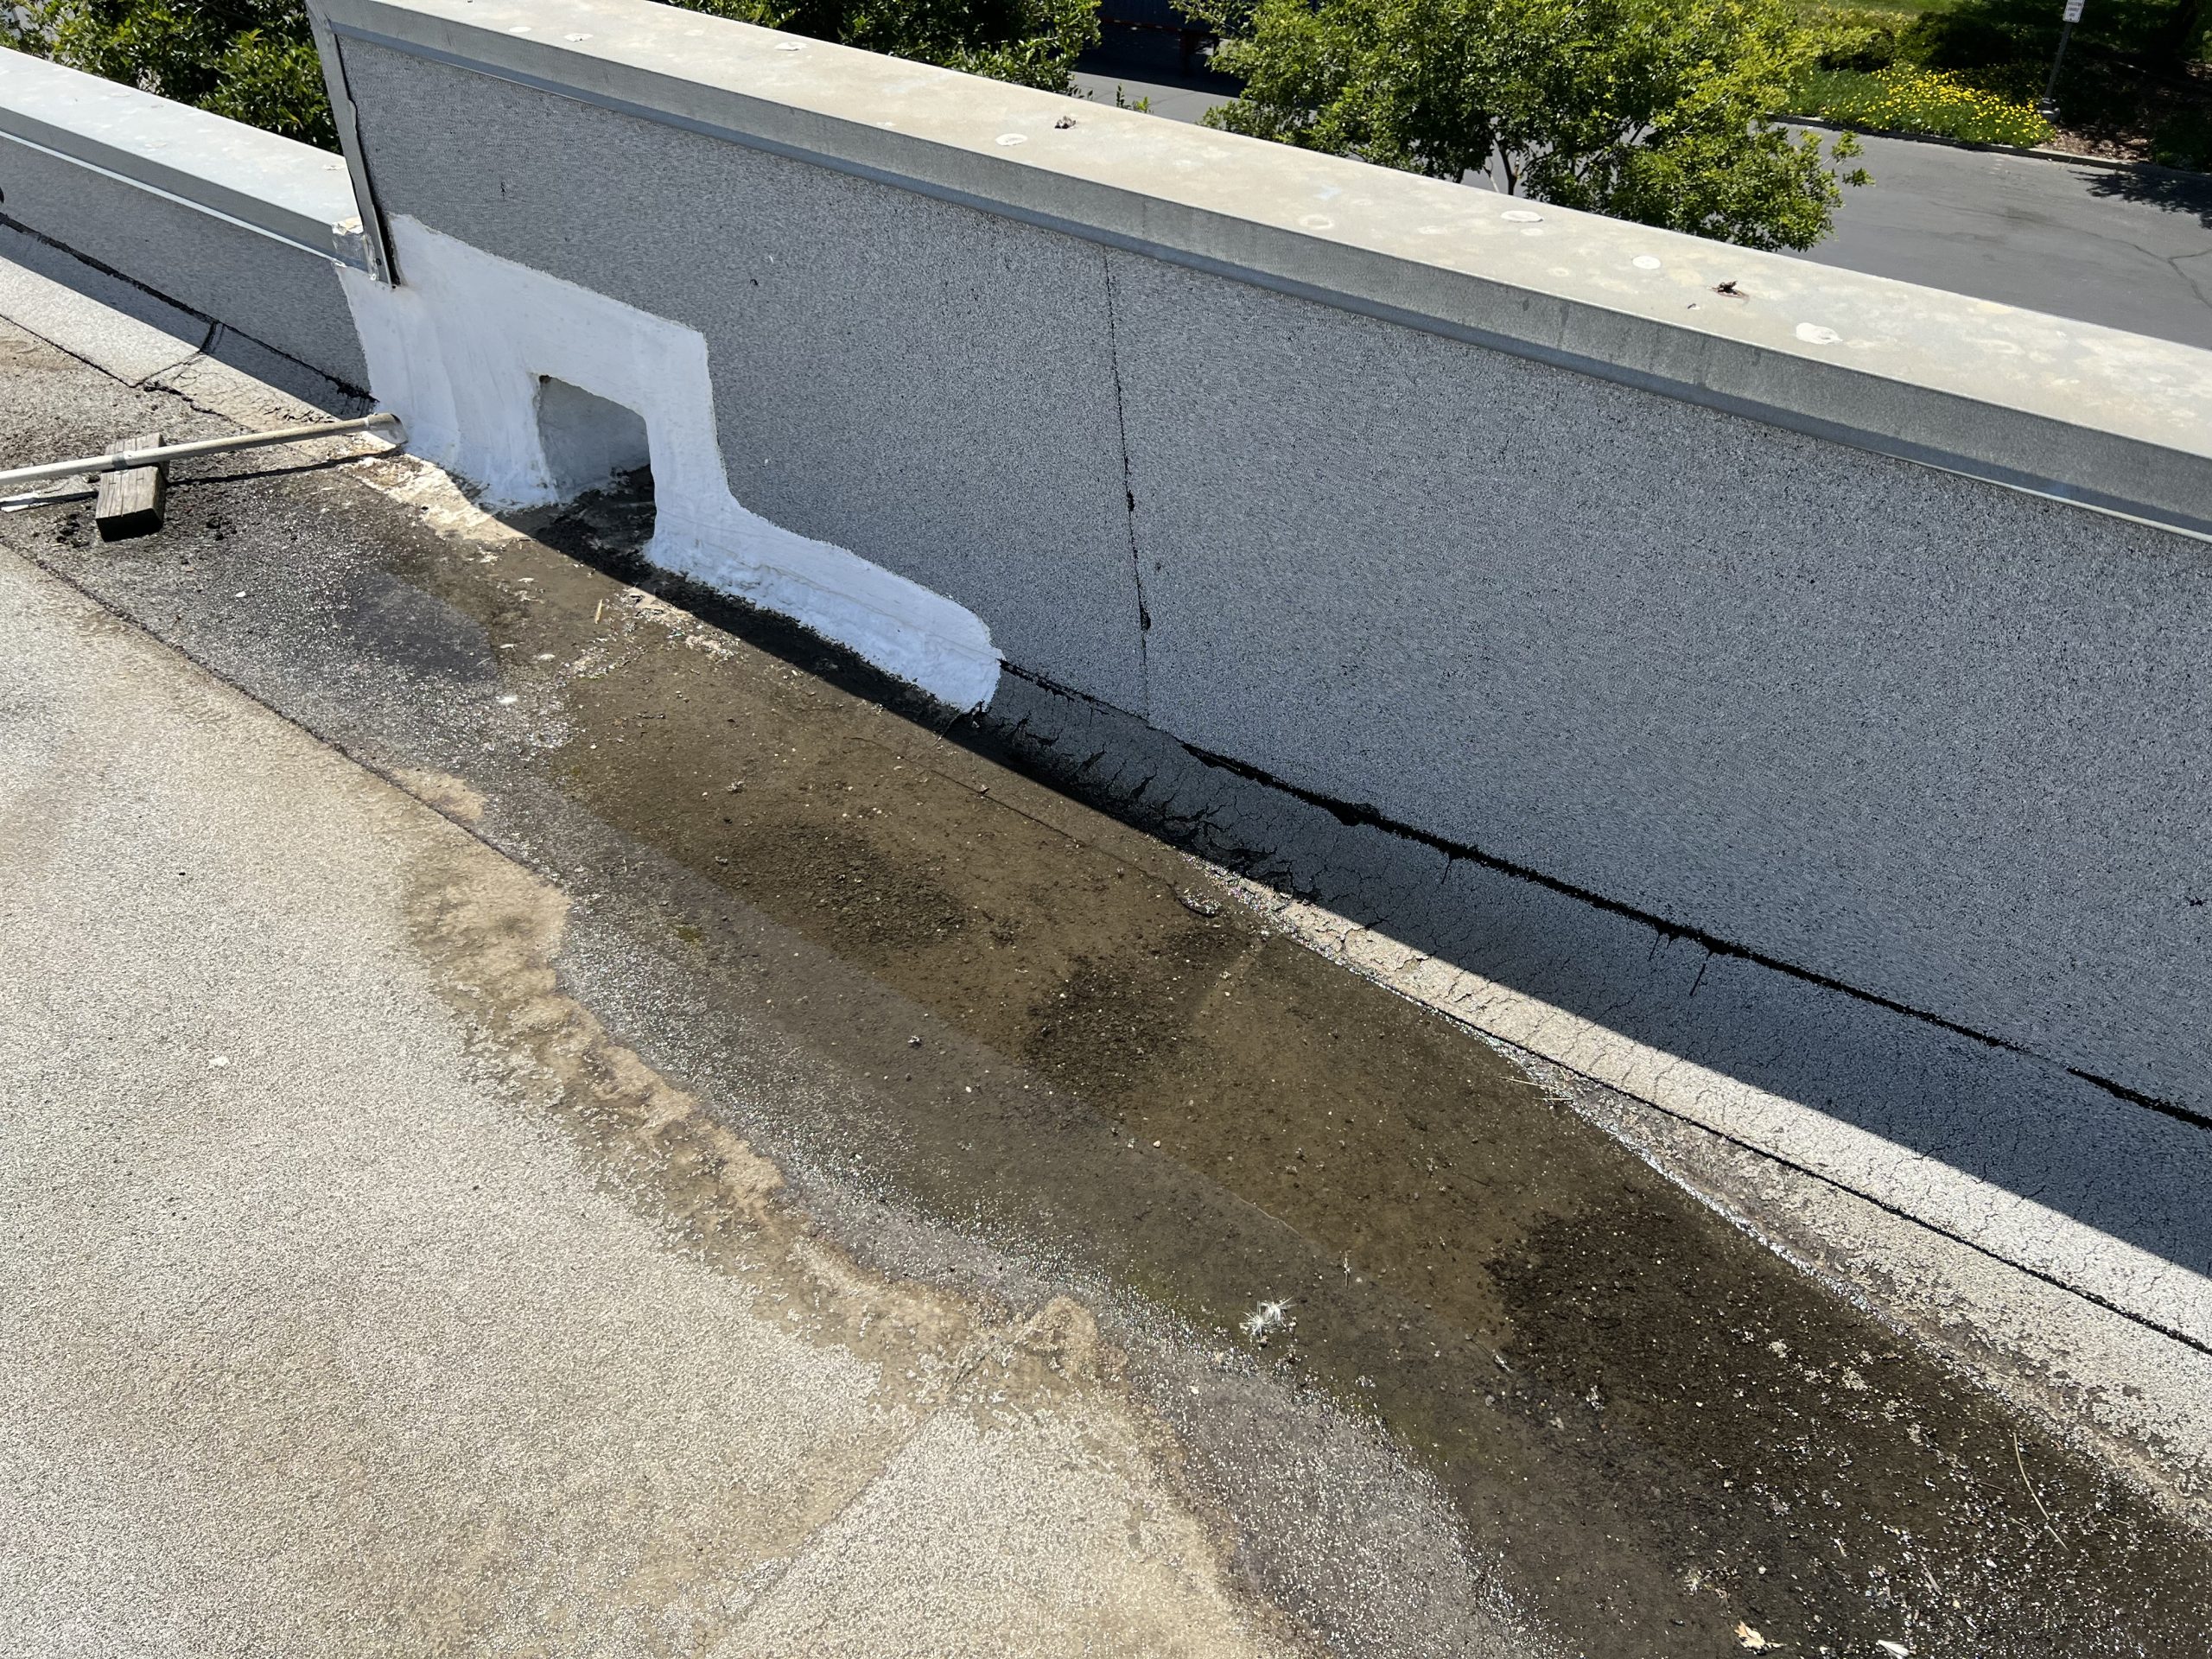 Common Causes of Roof Leaks in Commercial Buildings